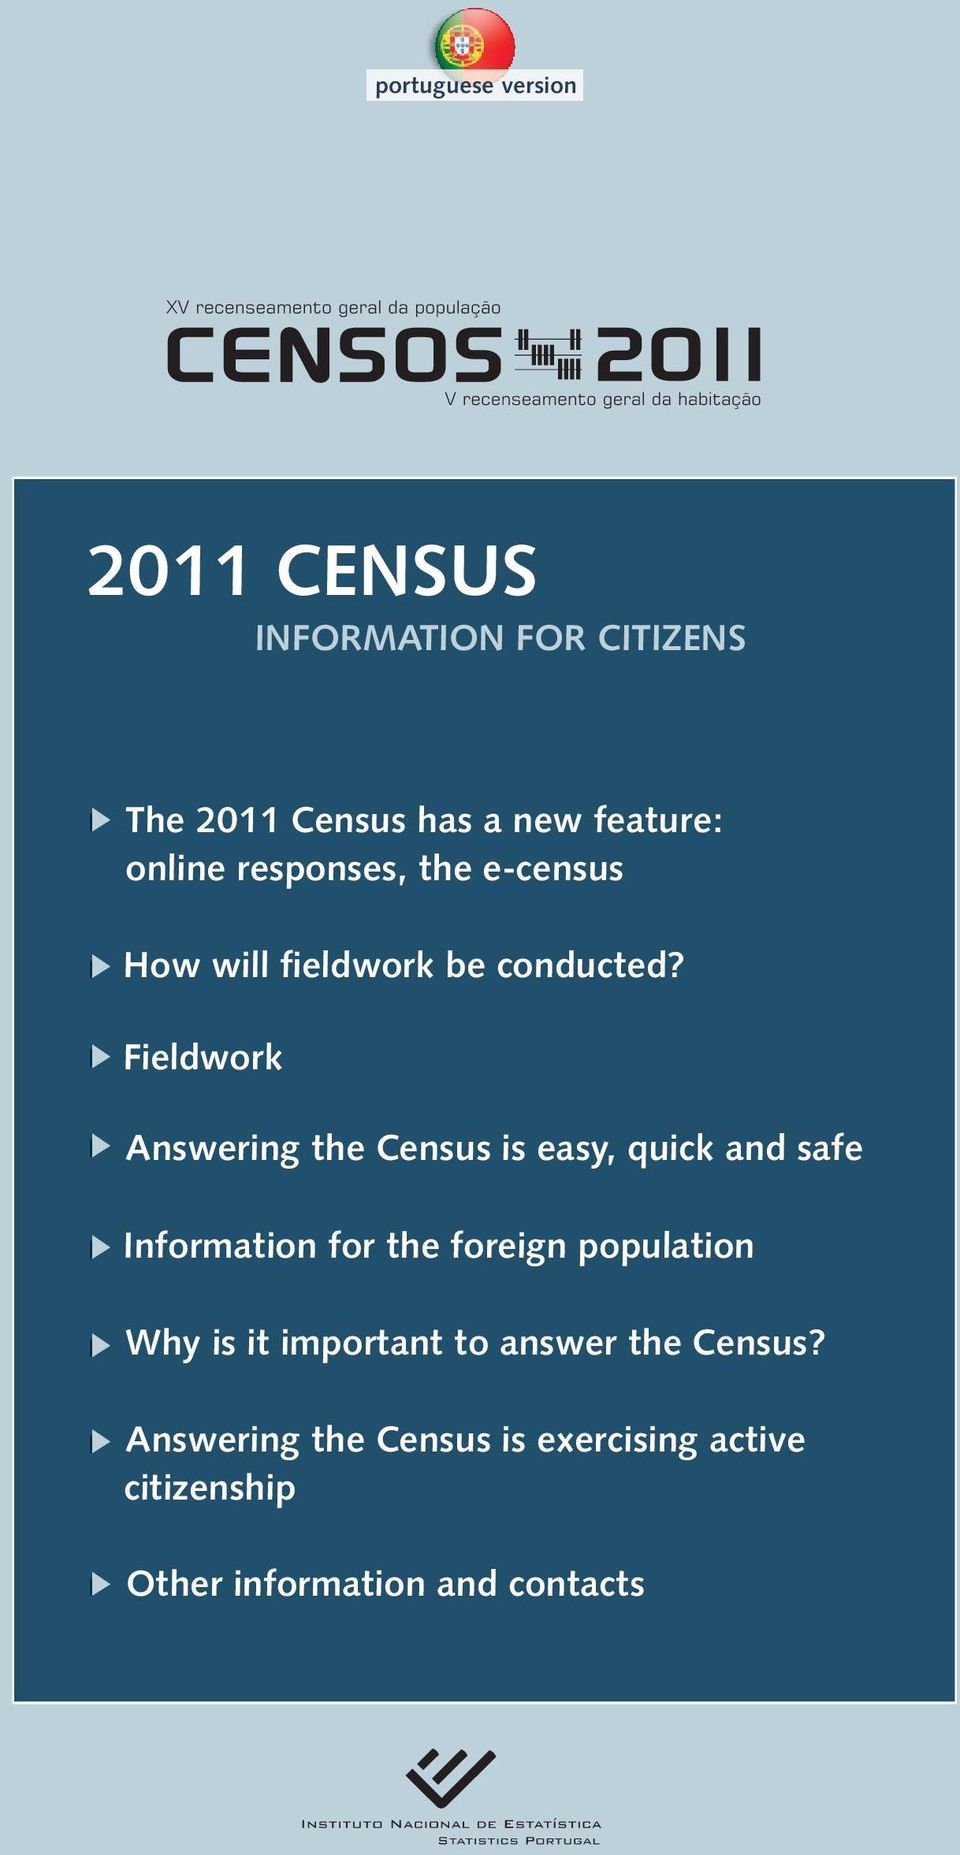 Fieldwork Answering the Census is easy, quick and safe Information for the foreign population